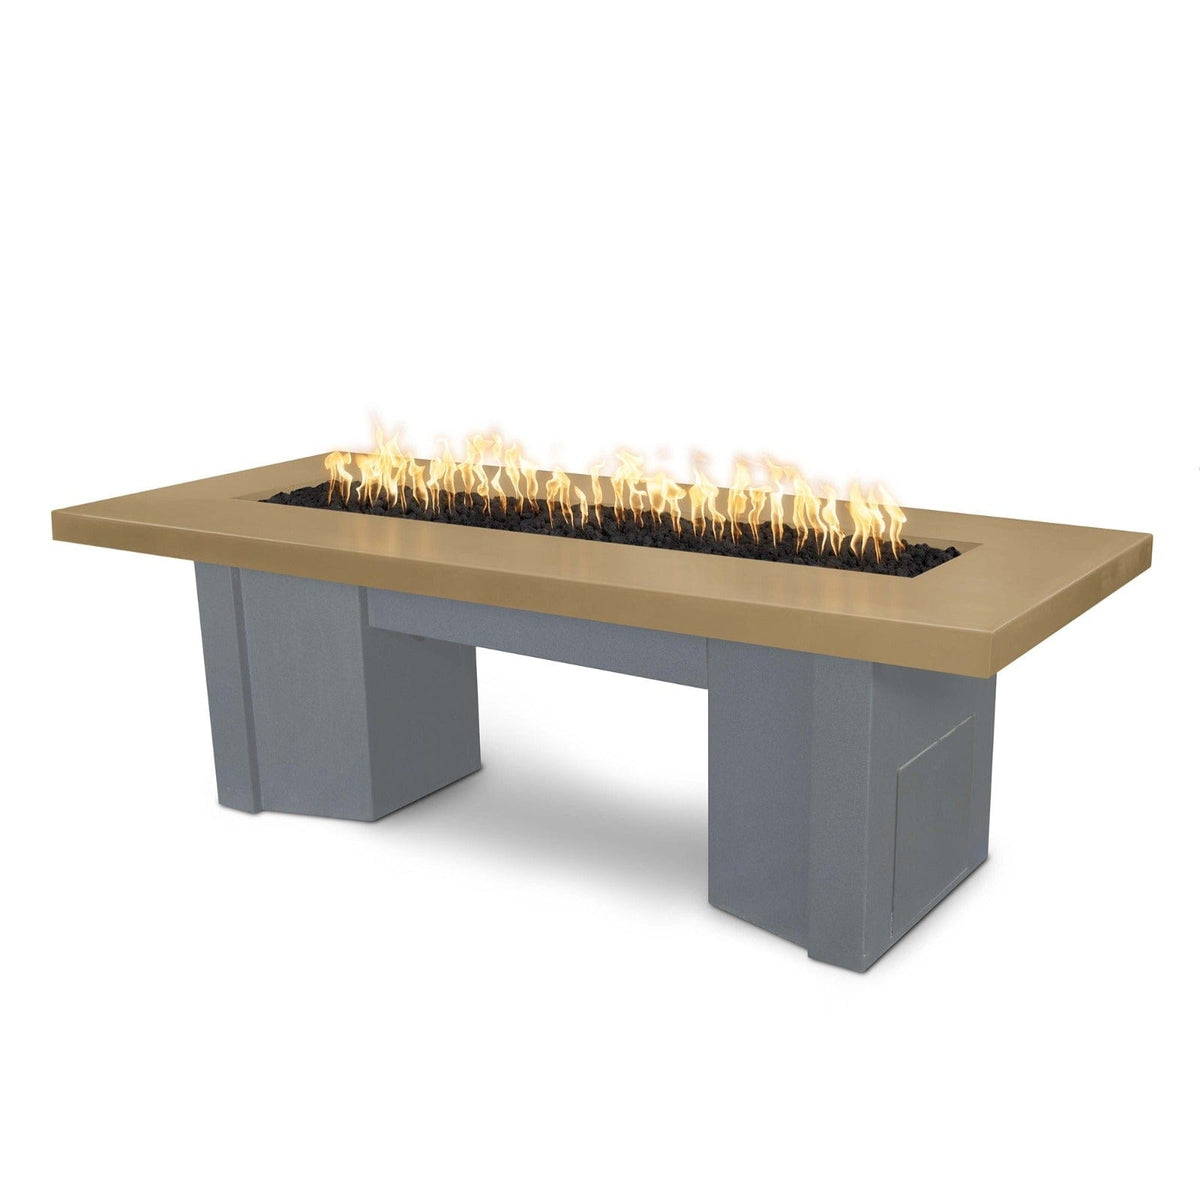 The Outdoor Plus Fire Features Brown (-BRN) / Gray Powder Coated Steel (-GRY) The Outdoor Plus 60&quot; Alameda Fire Table Smooth Concrete in Liquid Propane - 110V Plug &amp; Play Electronic Ignition / OPT-ALMGFRC60EKIT-LP